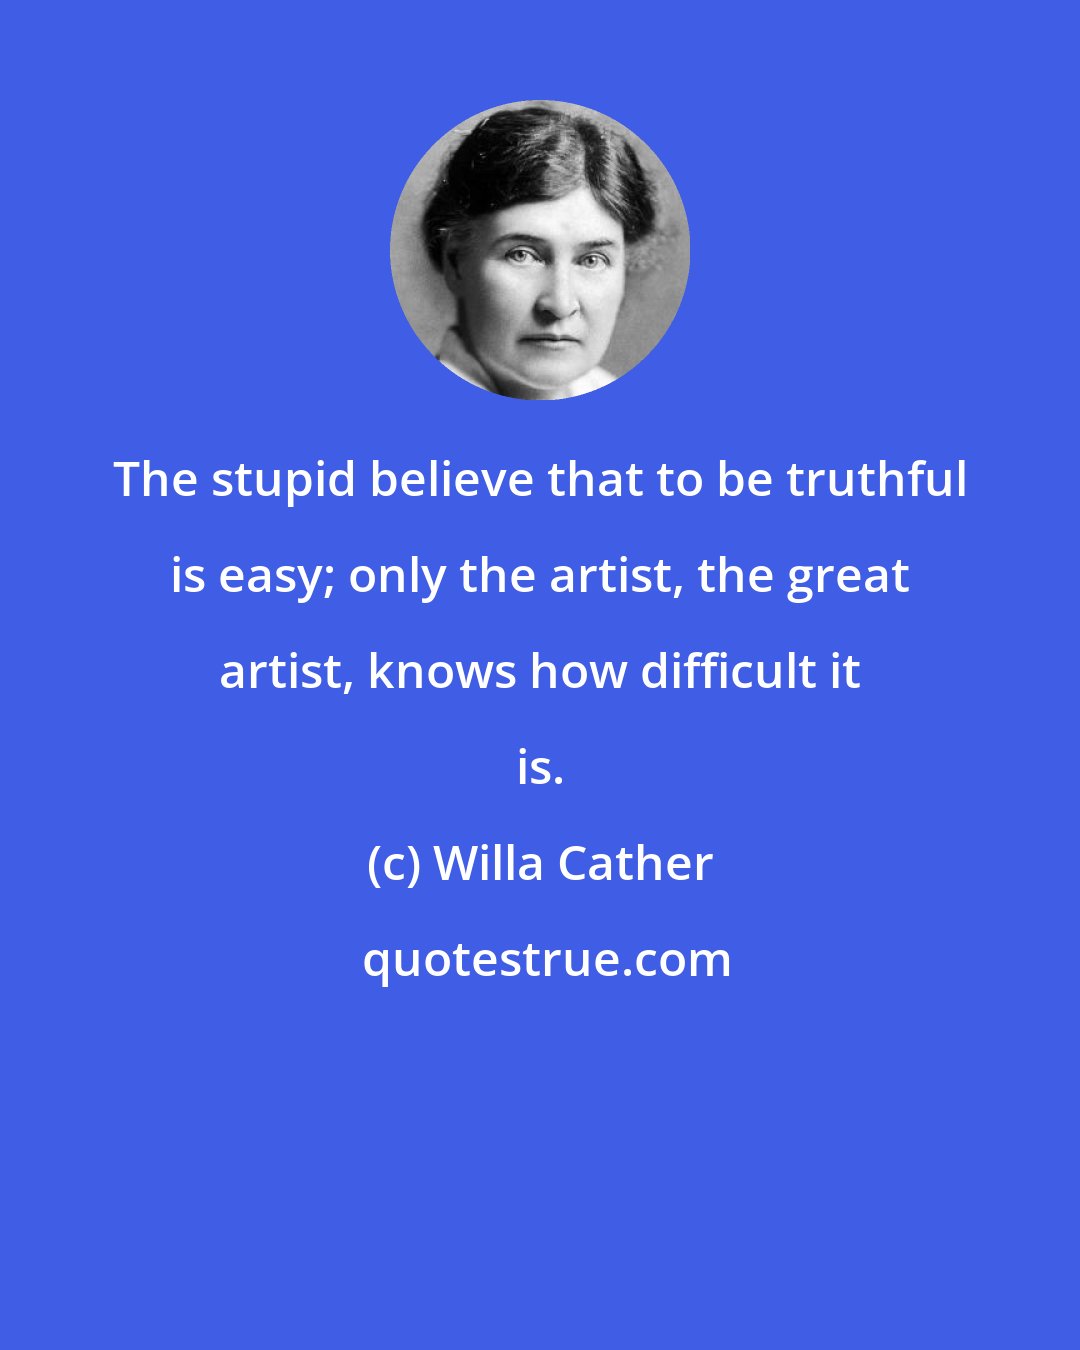 Willa Cather: The stupid believe that to be truthful is easy; only the artist, the great artist, knows how difficult it is.